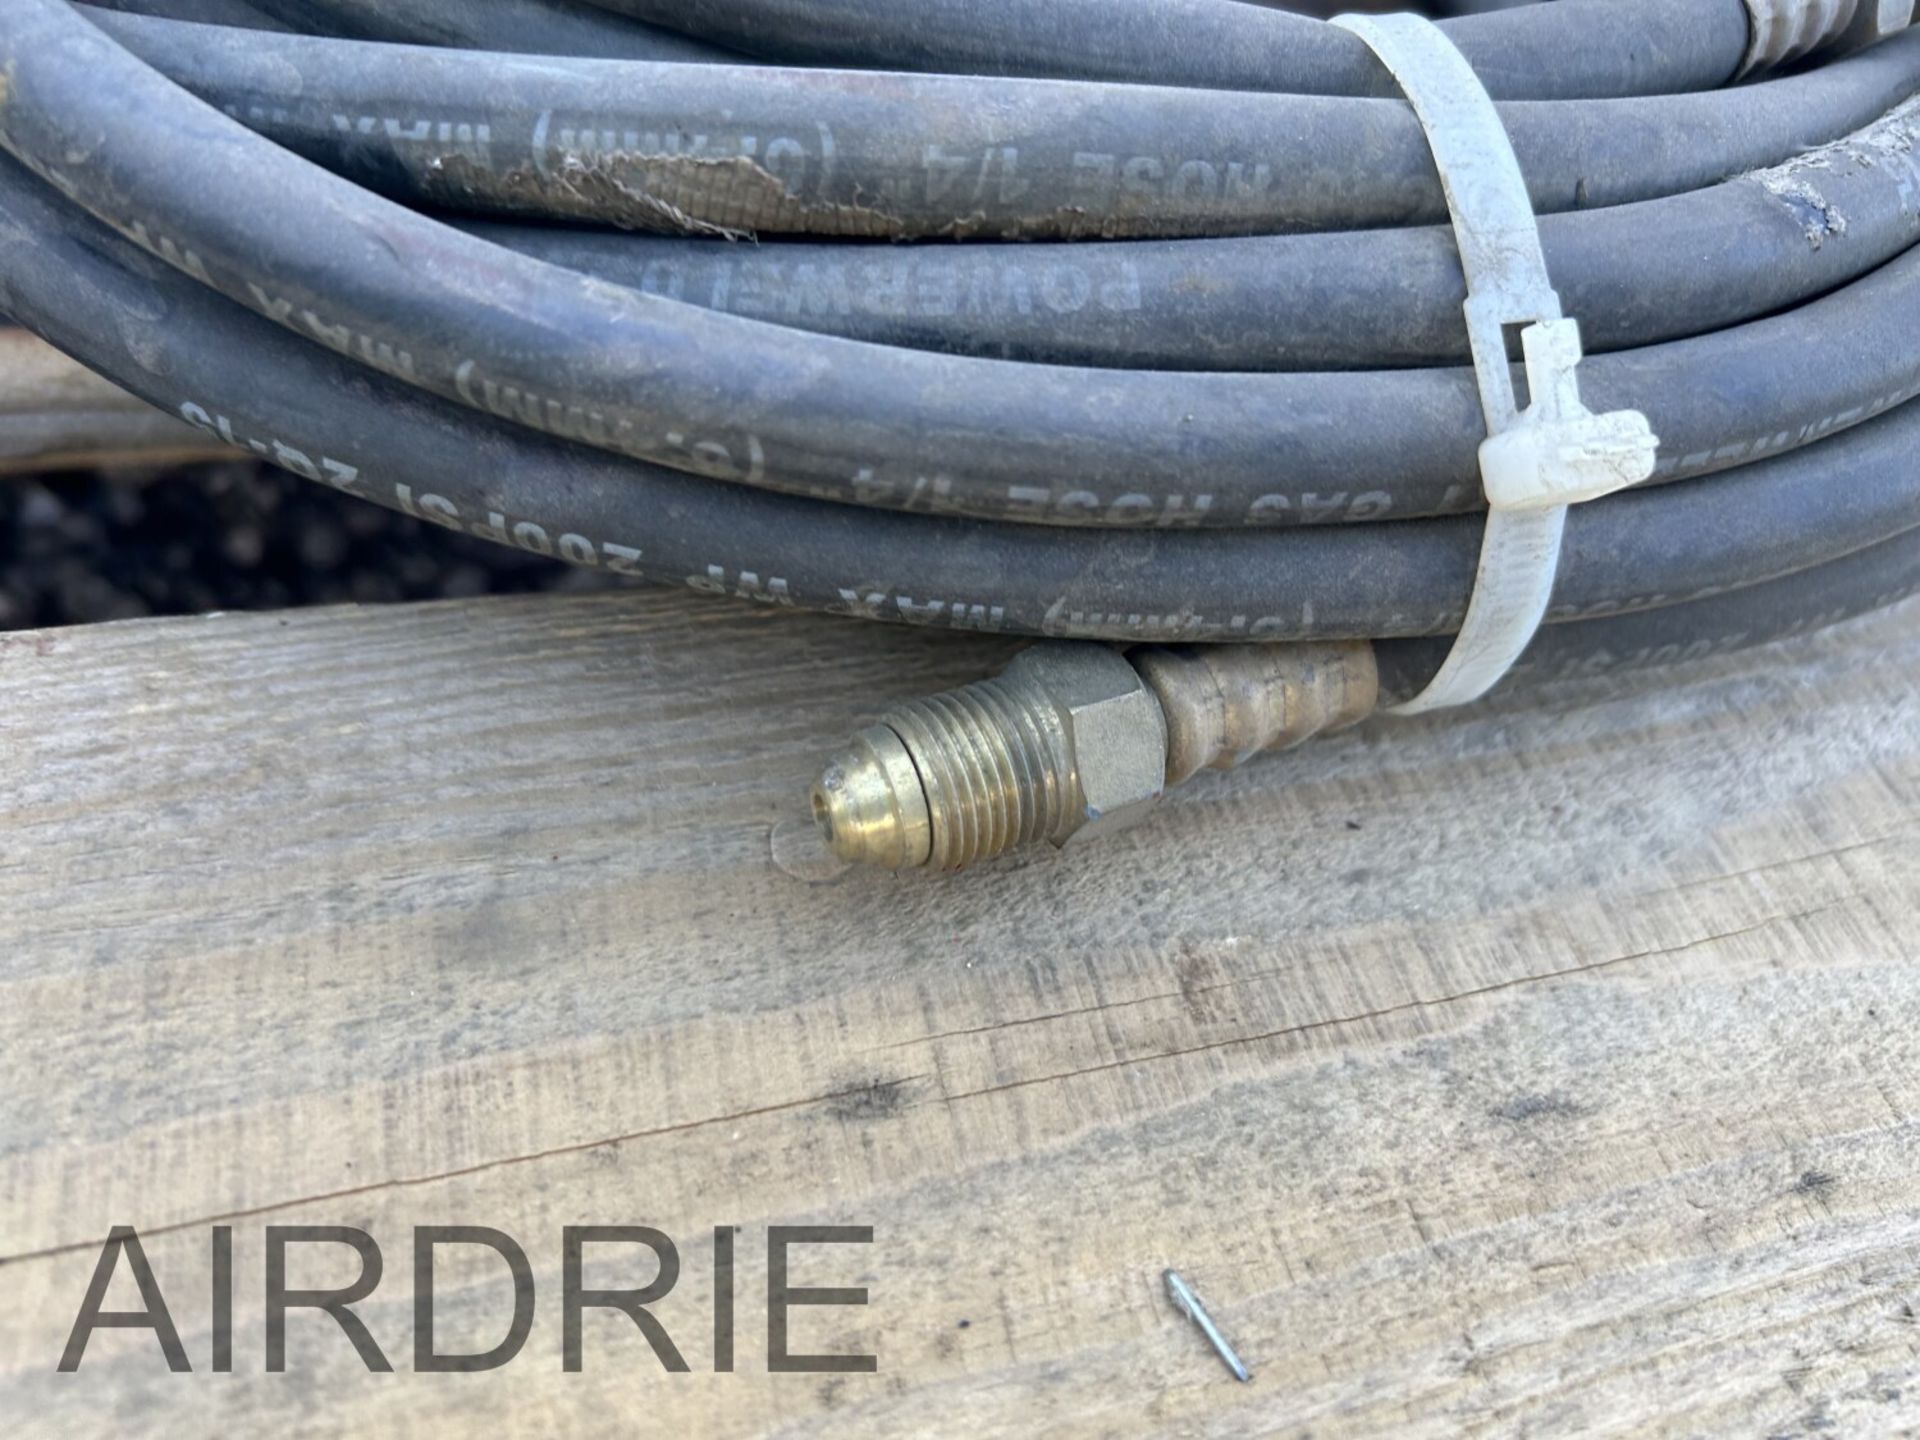 *OFFSITE* L/O - 1/4" WELD INERT GAS HOSES - Image 3 of 4